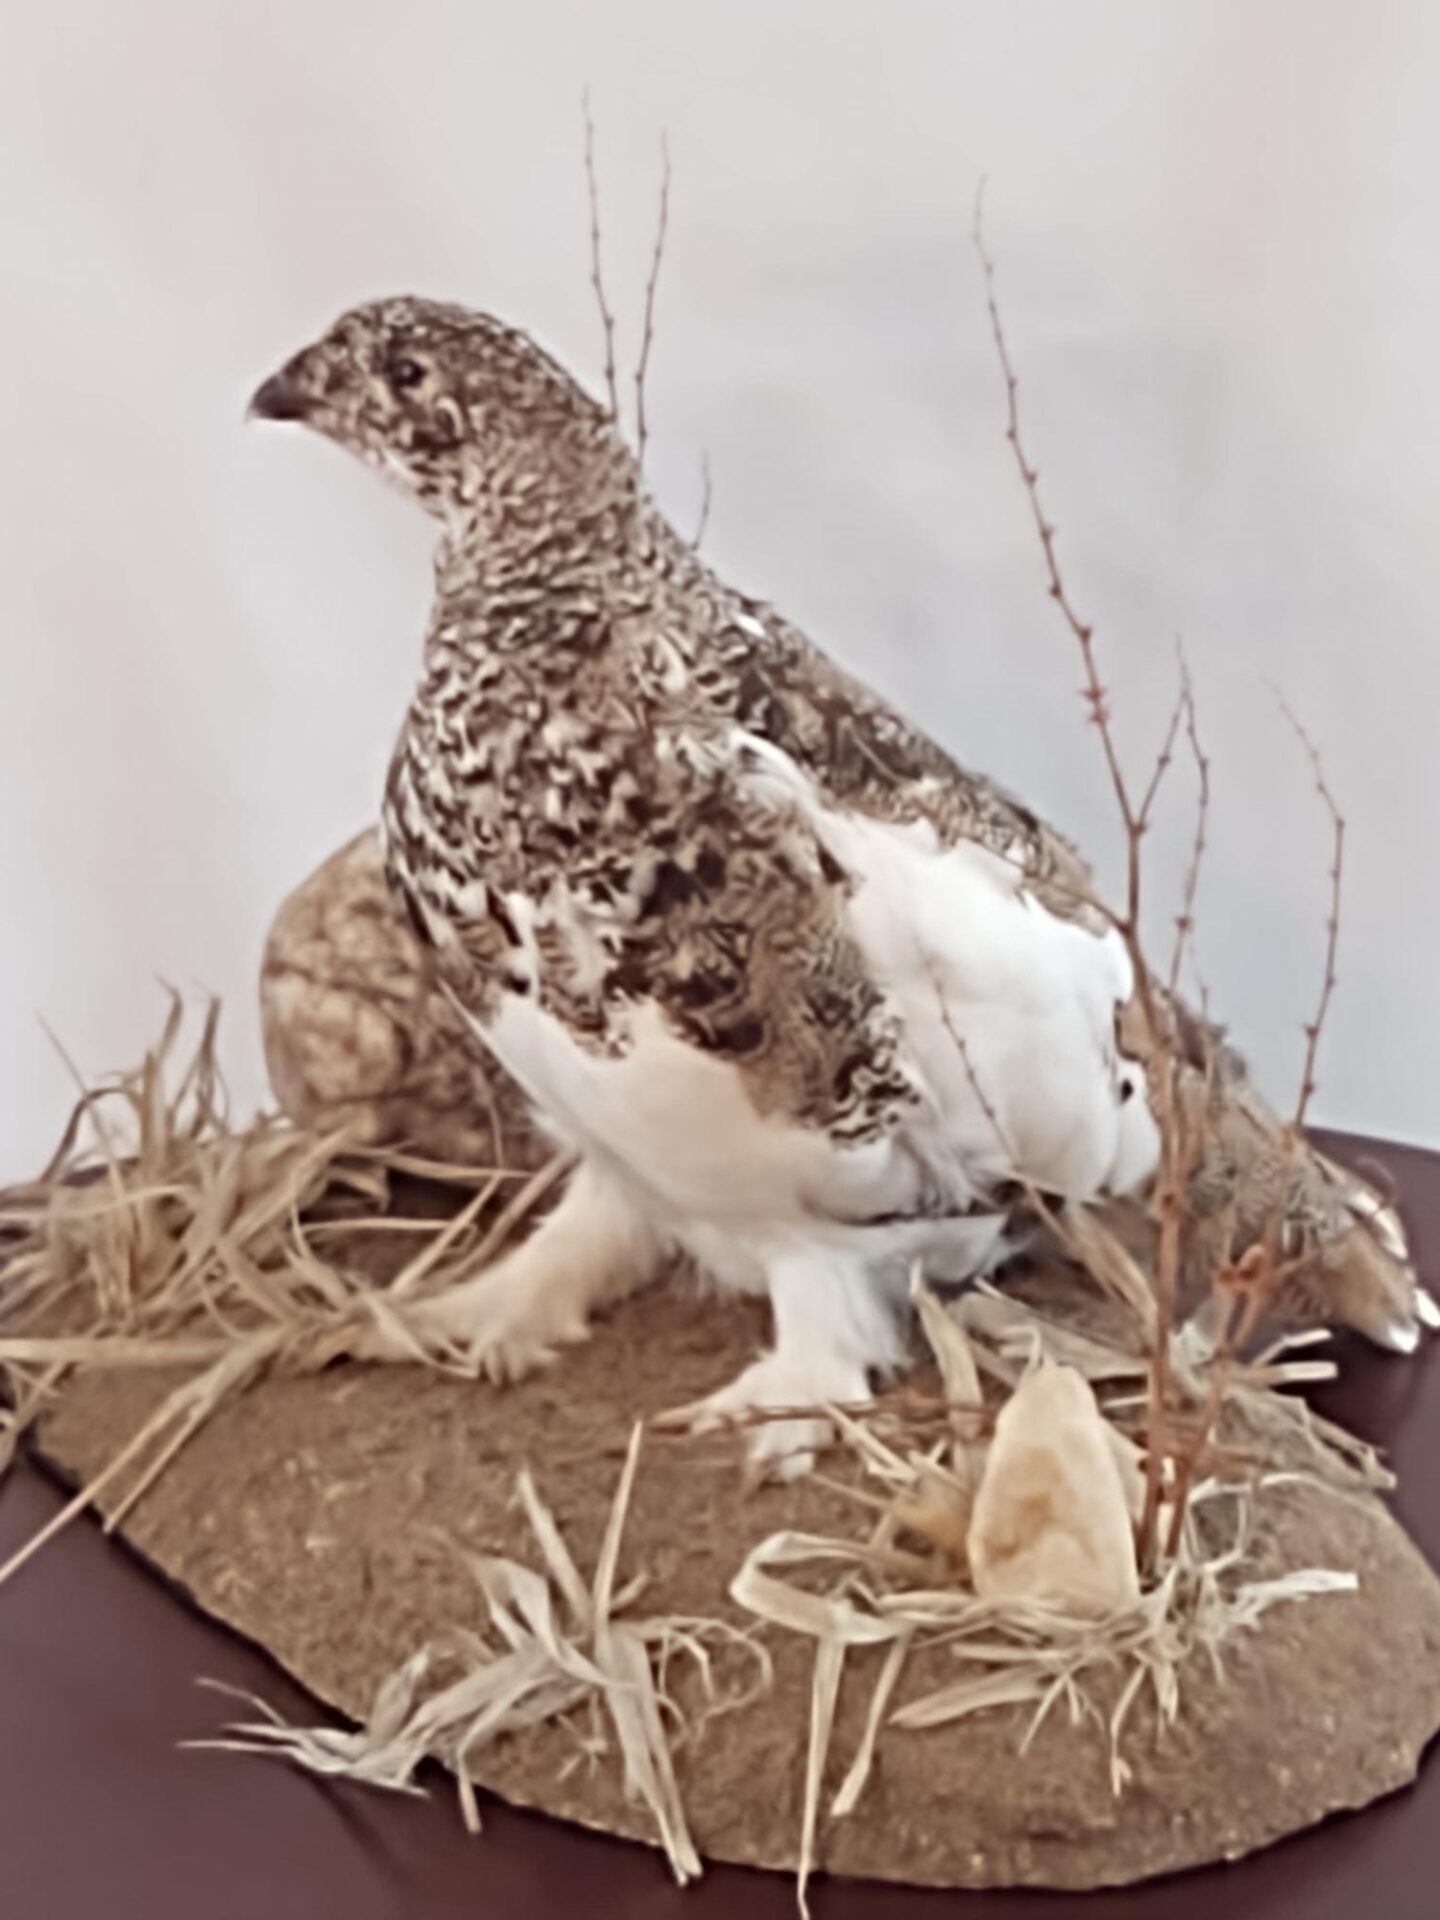 Beautifully designed bird taxidermy available for sale